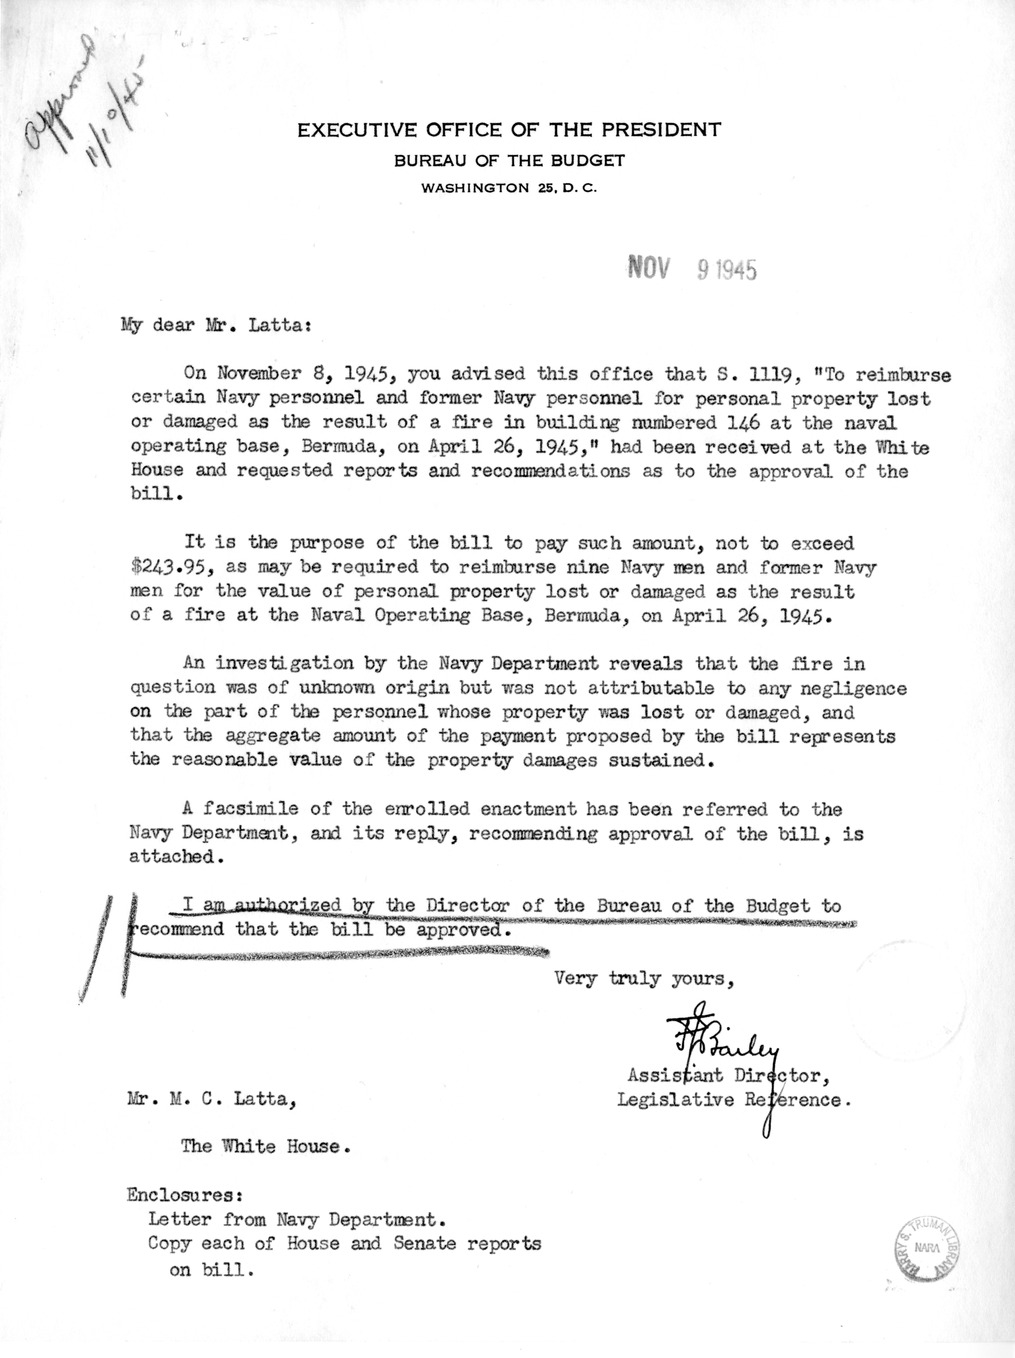 Memorandum from Frederick J. Bailey to M. C. Latta, S. 1119, To Reimburse Certain Navy Personnel and Former Navy Personnel for Personal Property Lost or Damaged as the Result of a Fire in Building Numbered 146 at the Naval Operating Base, Bermuda, on April 26, 1945, with Attachments